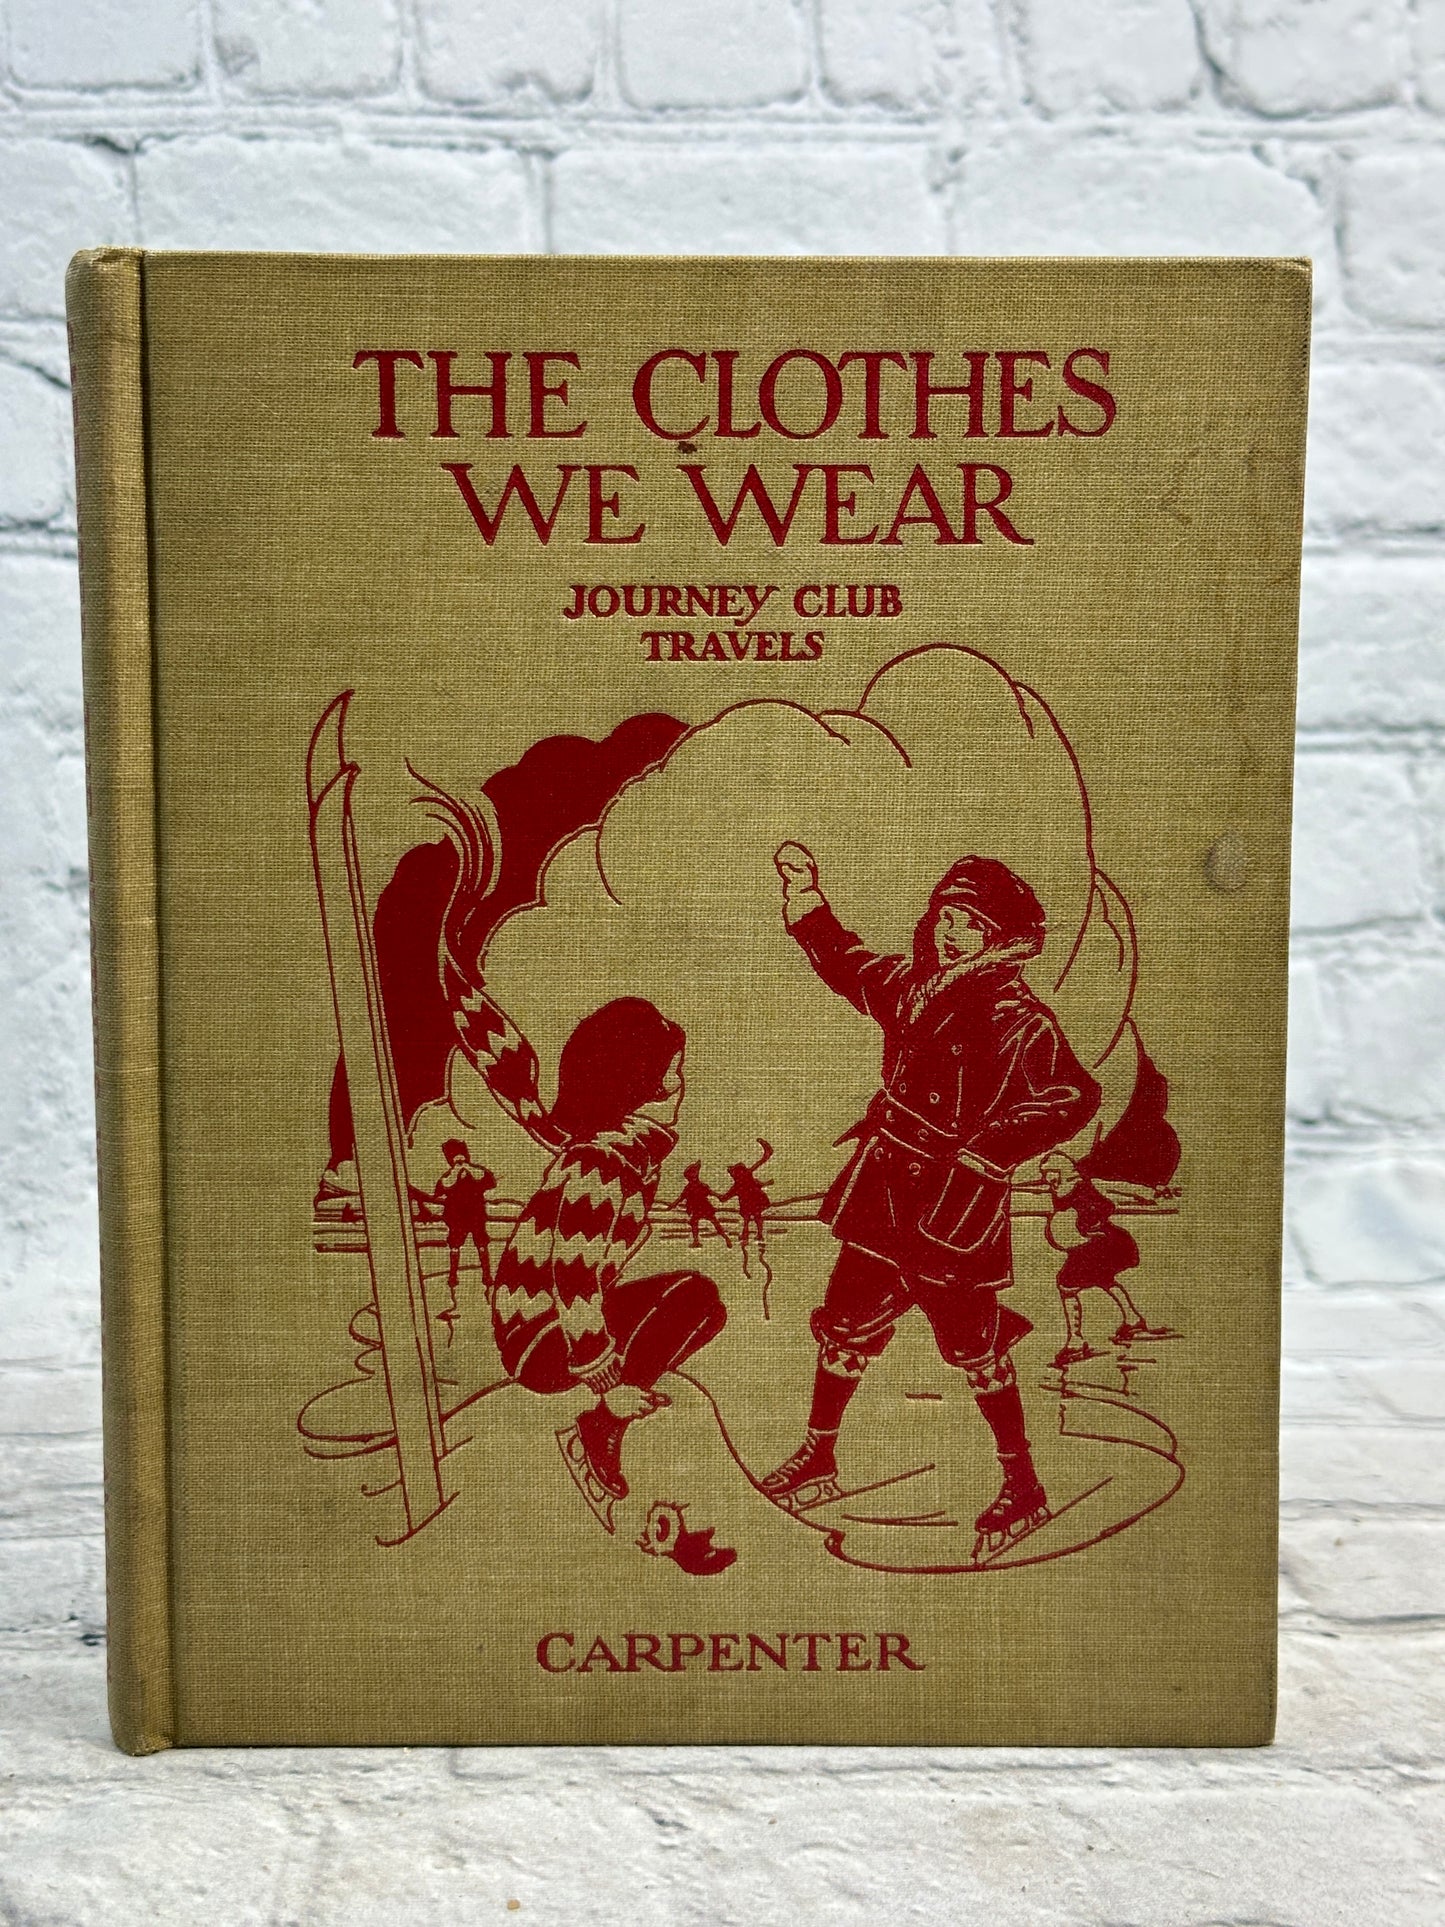 The Clothes We Wear, Carpenter's Journey Club Travels by Frank Carpenter [1926]